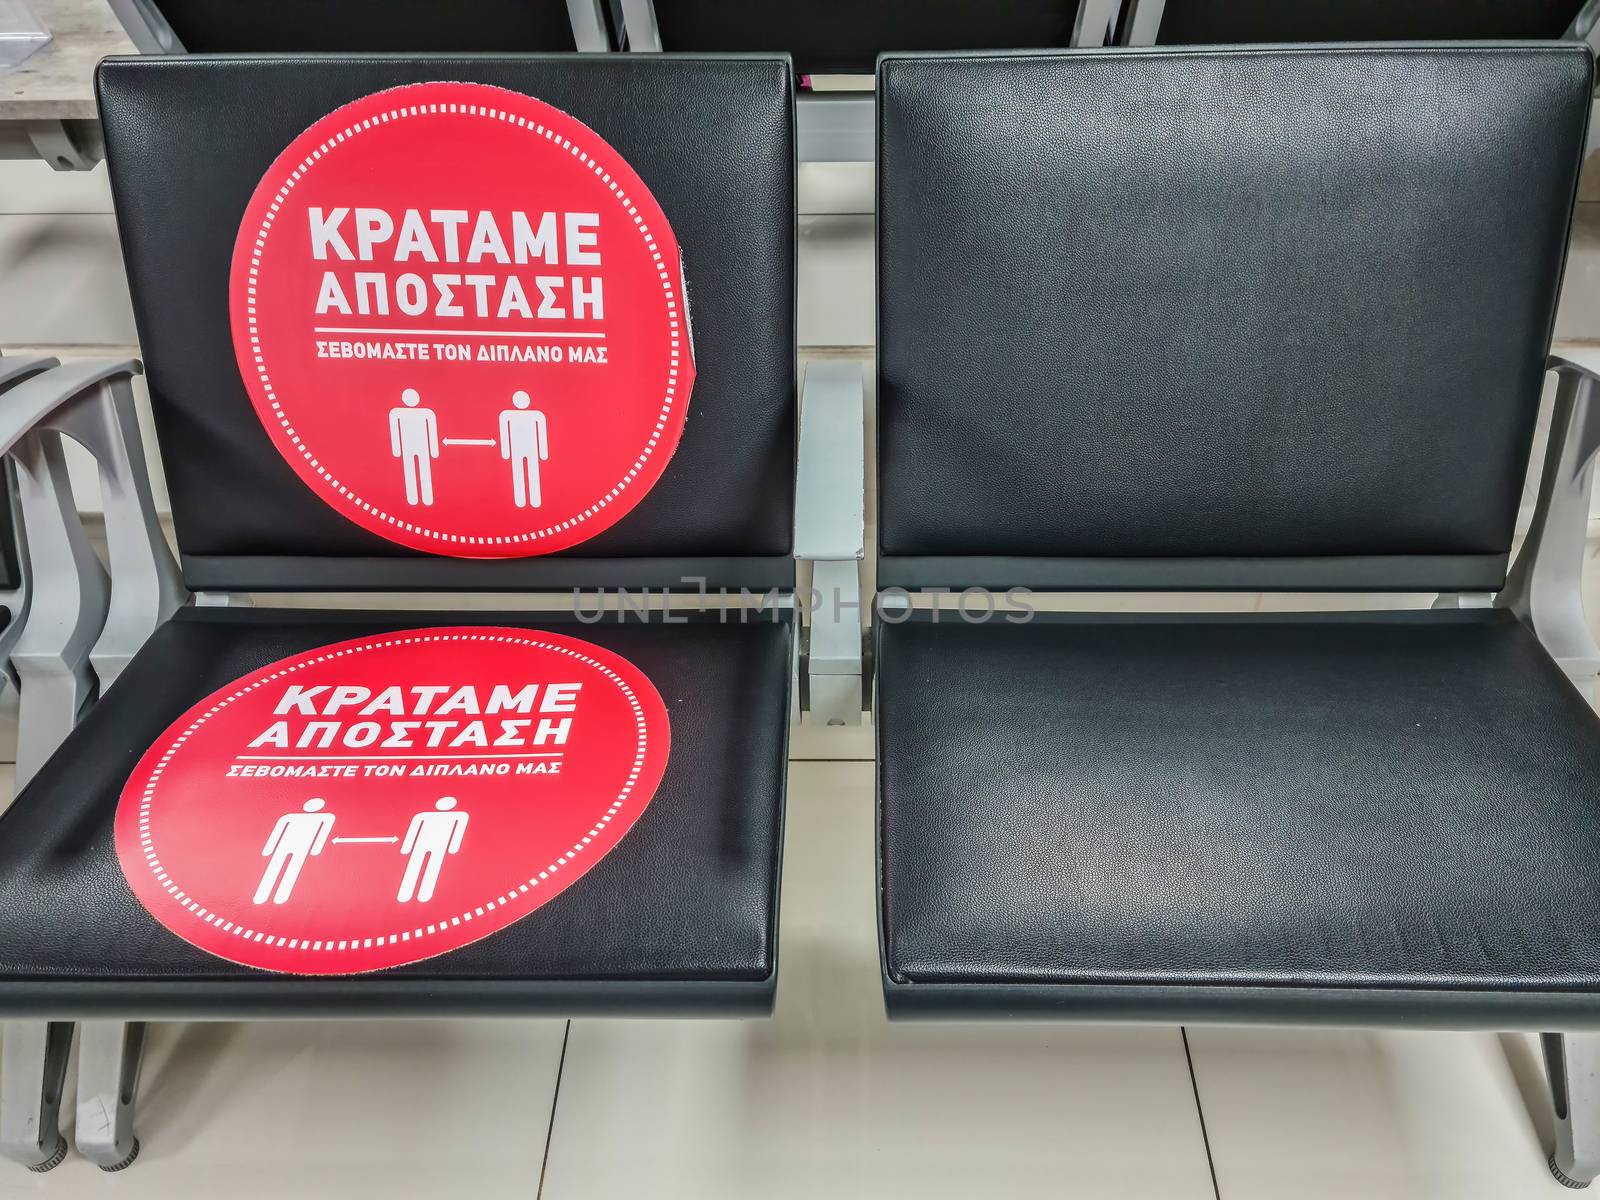 Chairs sticker suggesting customers keep 1.5 meters away as Coronavirus measures affect business & daily life.ssaloniki, Greece.